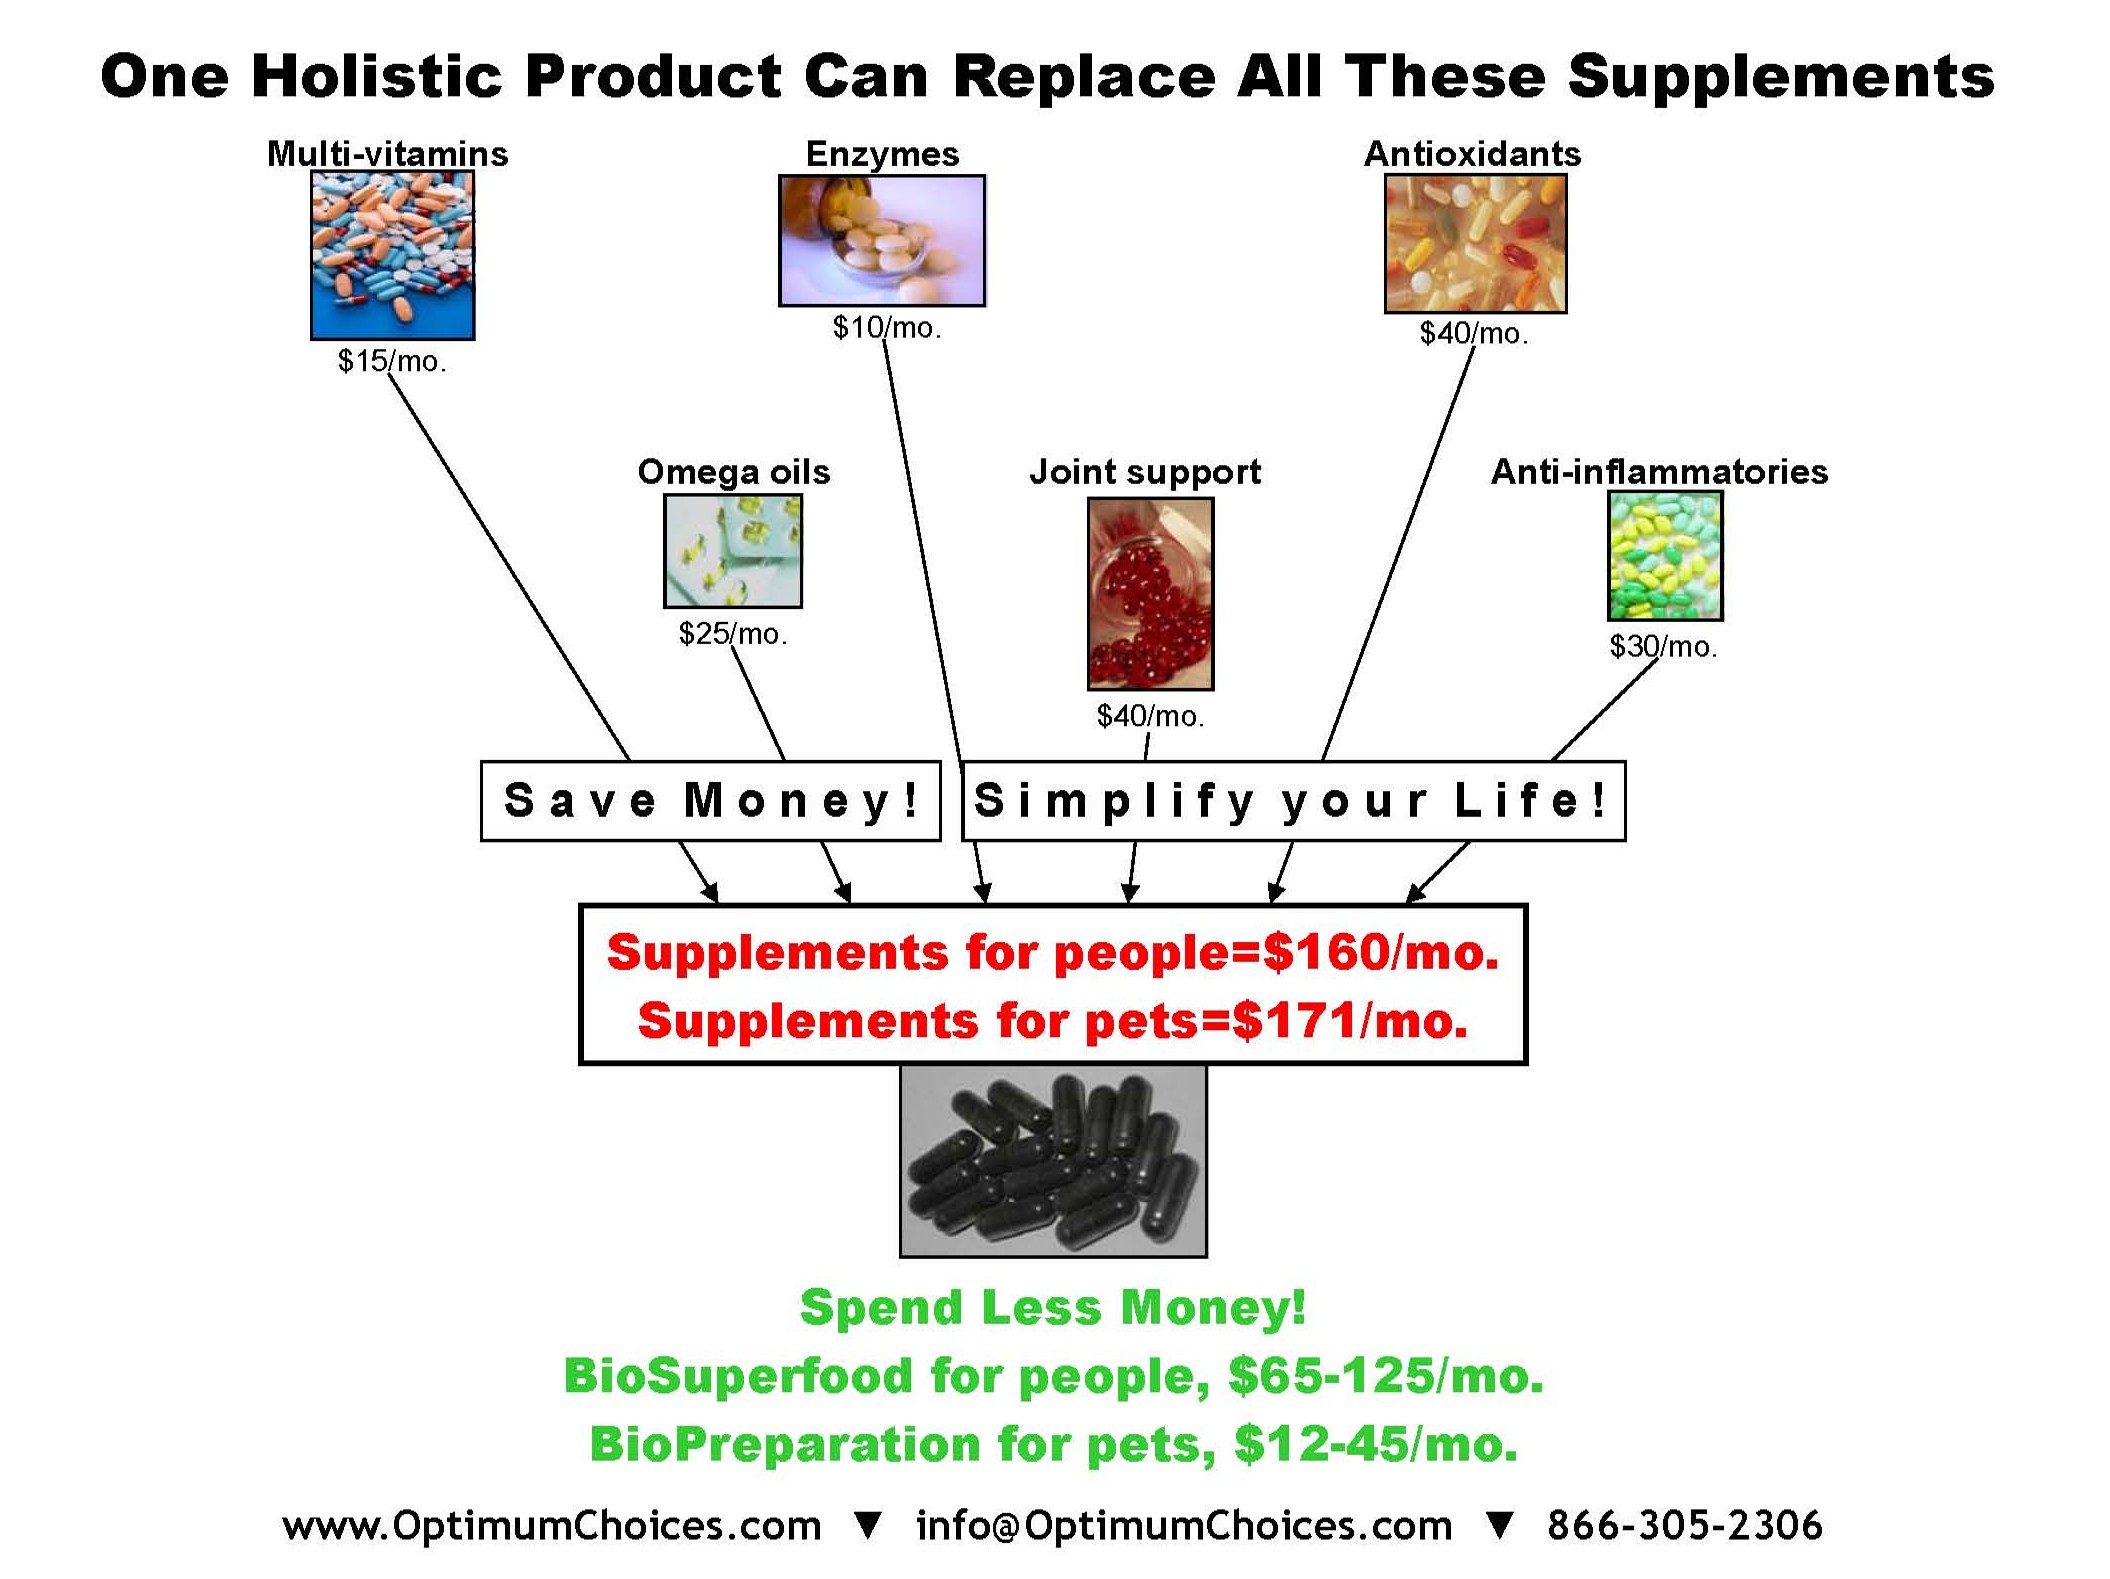 Supplements vs whole food products